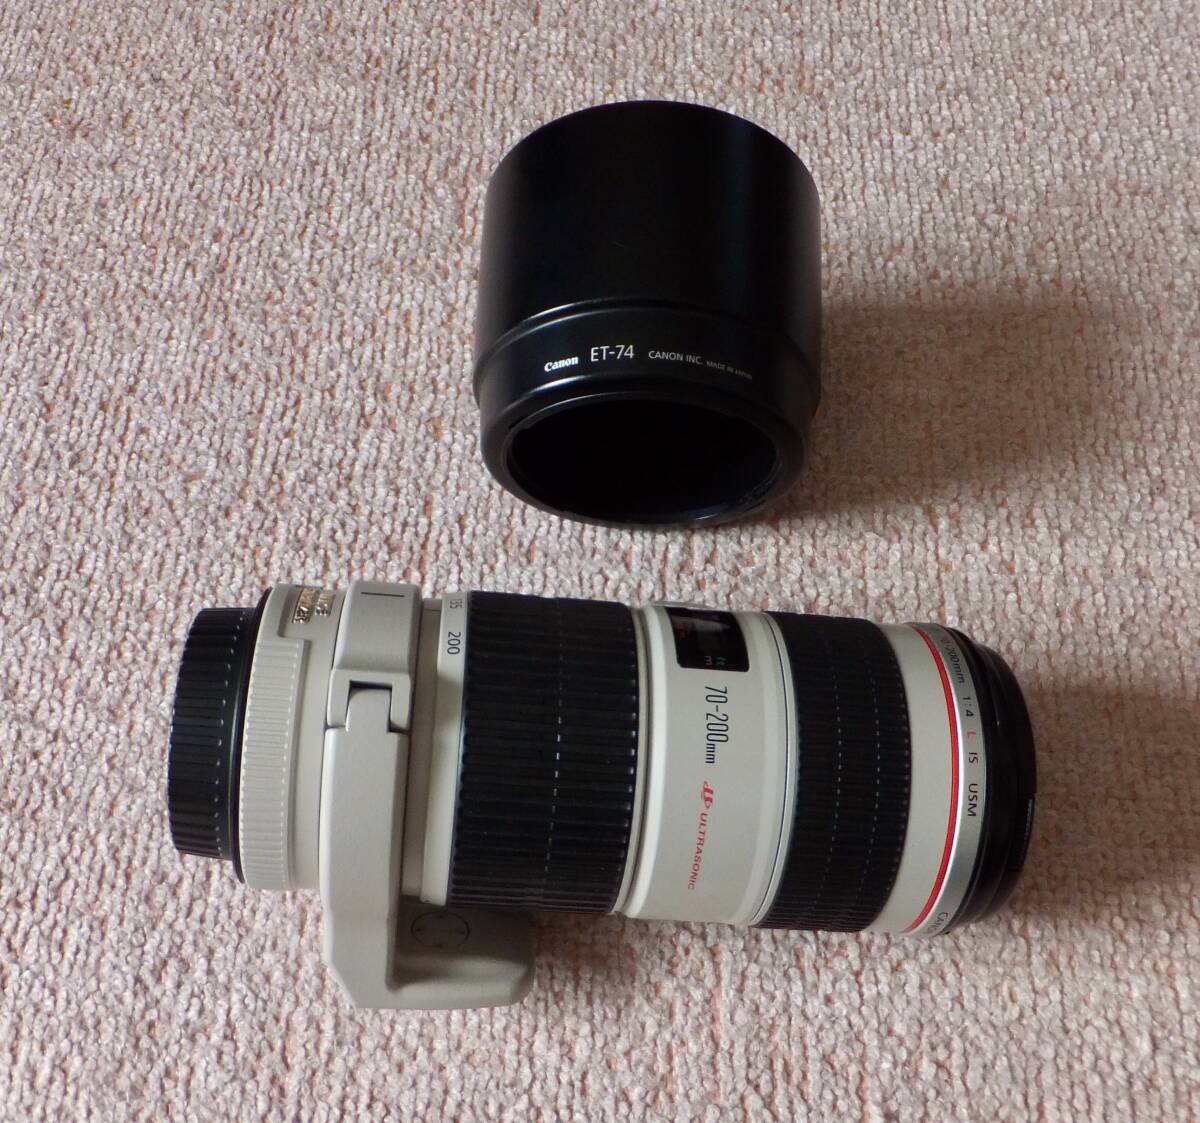 CANON ZOOM LENS EF 70 - 200mm 1:4 L IS USM beautiful goods!